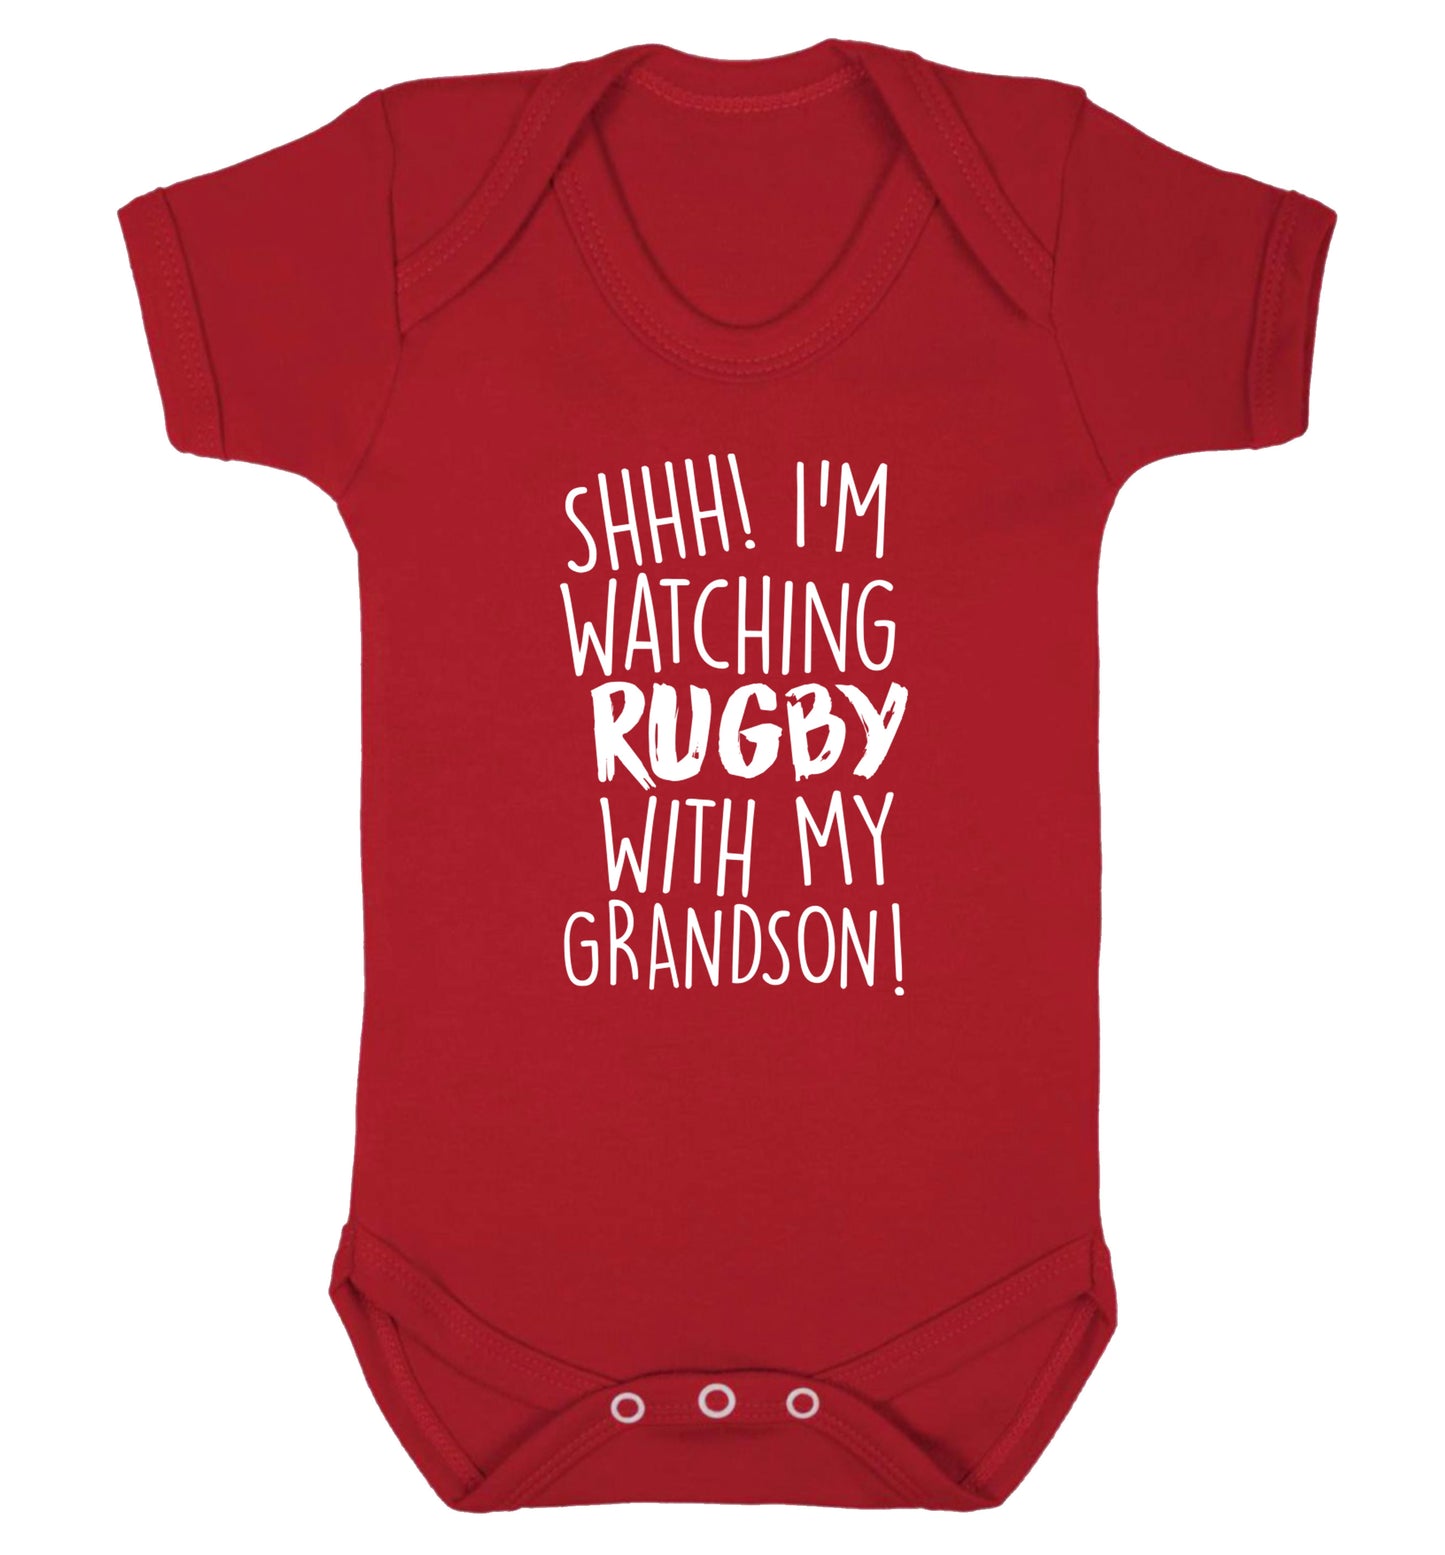 Shh I'm watching rugby with my grandson Baby Vest red 18-24 months